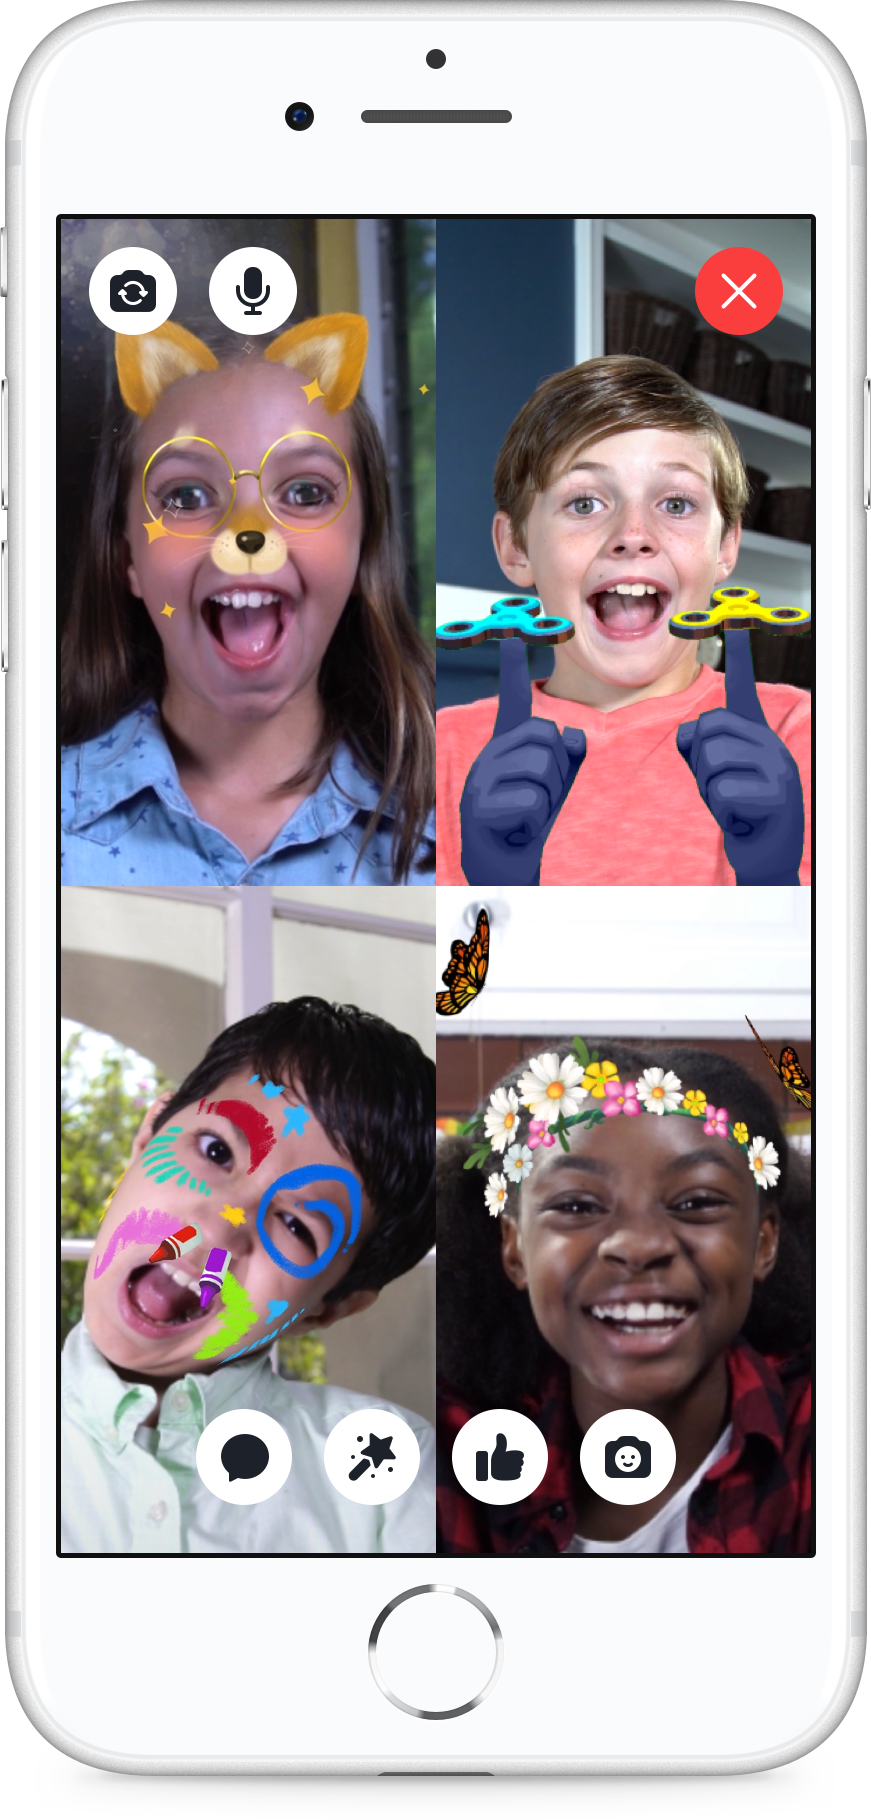 The Messenger Kids app lets users send text-based messages, video chat, tack on virtual stickers and masks, but has stricter rules and parental controls in place. Source: Facebook